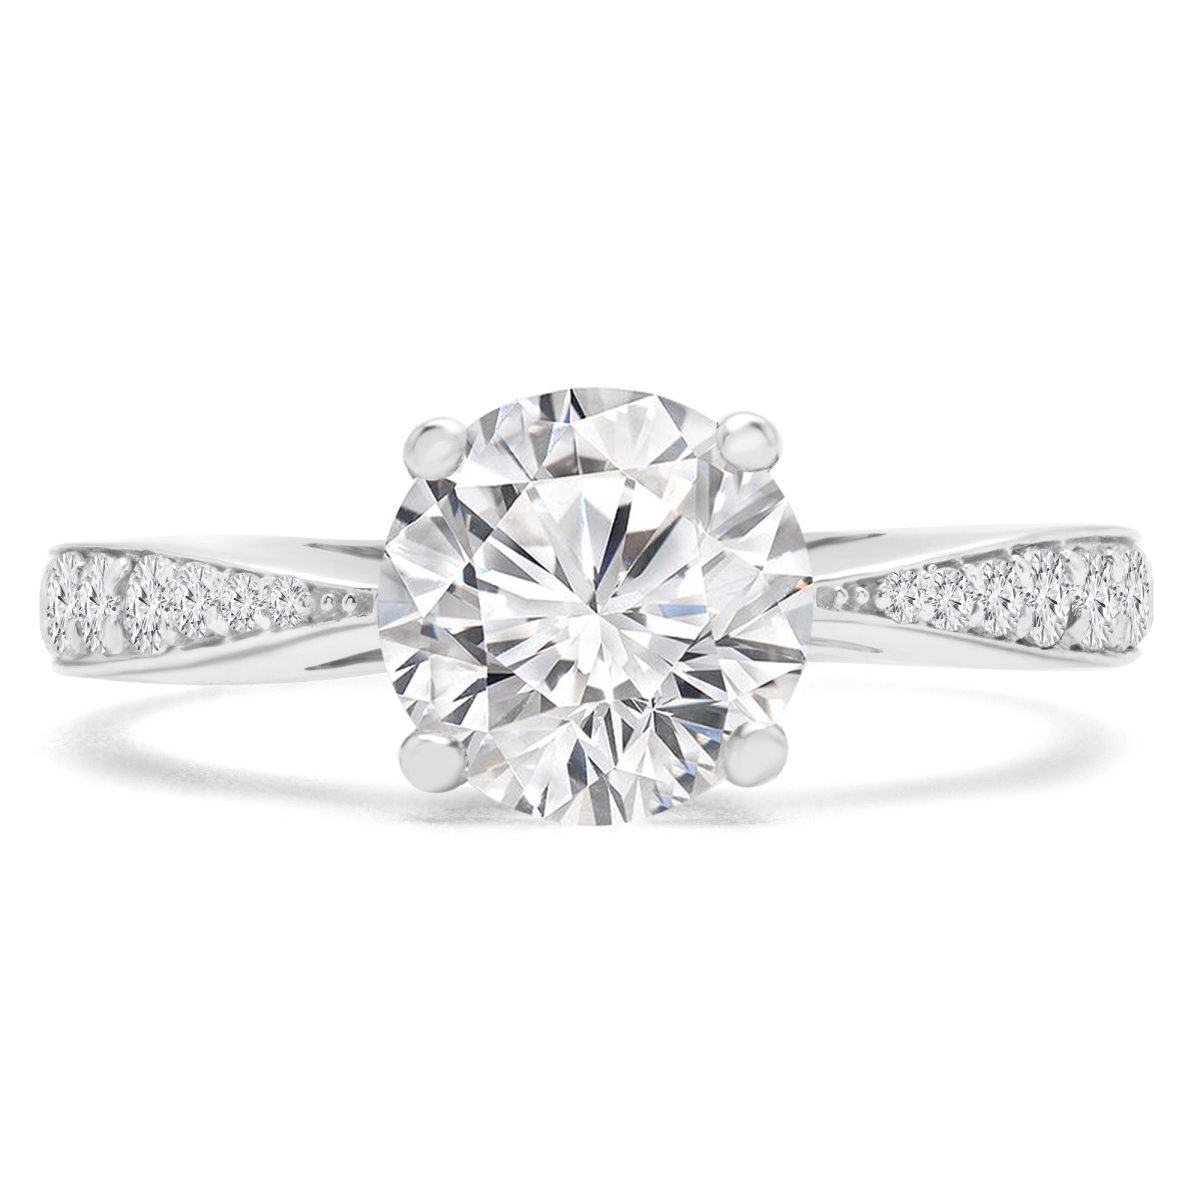 Picture of Majesty Diamonds MD190183-P 1.05 CTW Round Diamond Tappered Solitaire with Accents Engagement Ring in 14K White Gold